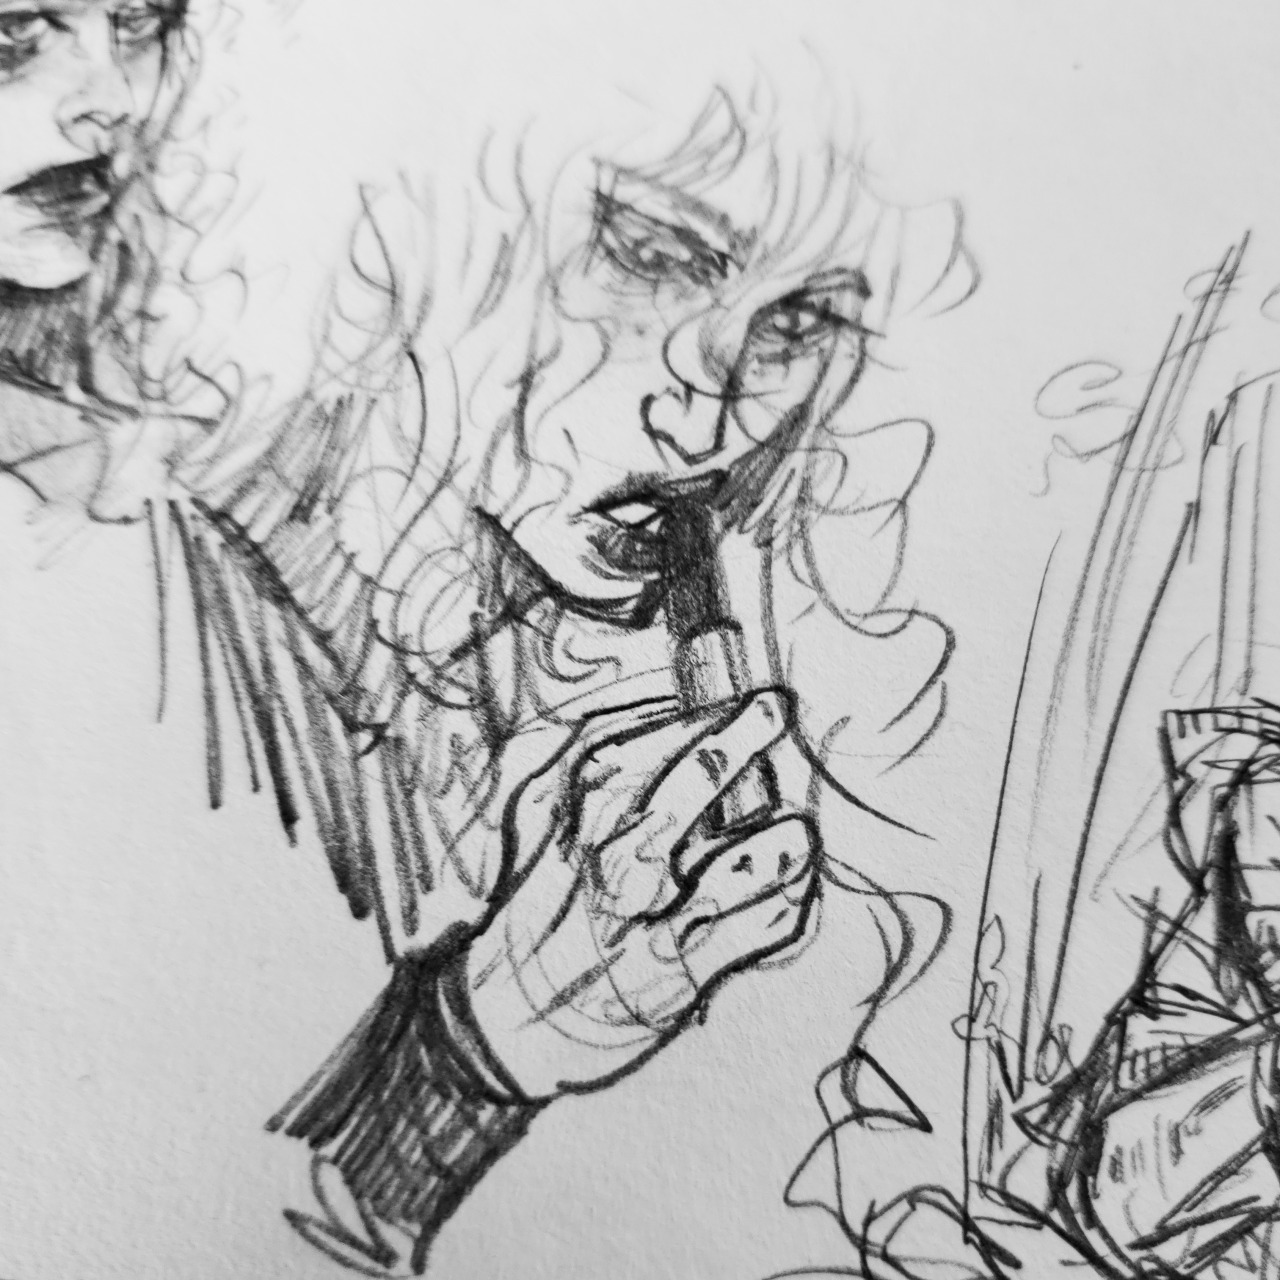 Drinking my morning coffee and finishing off the editing on these last few sketches. How is everyone? Anyone quarantined?—-Agrippa isn’t a huge fiend for makeup as he mostly relies on glamours, however, he wears lip and eye tints more often